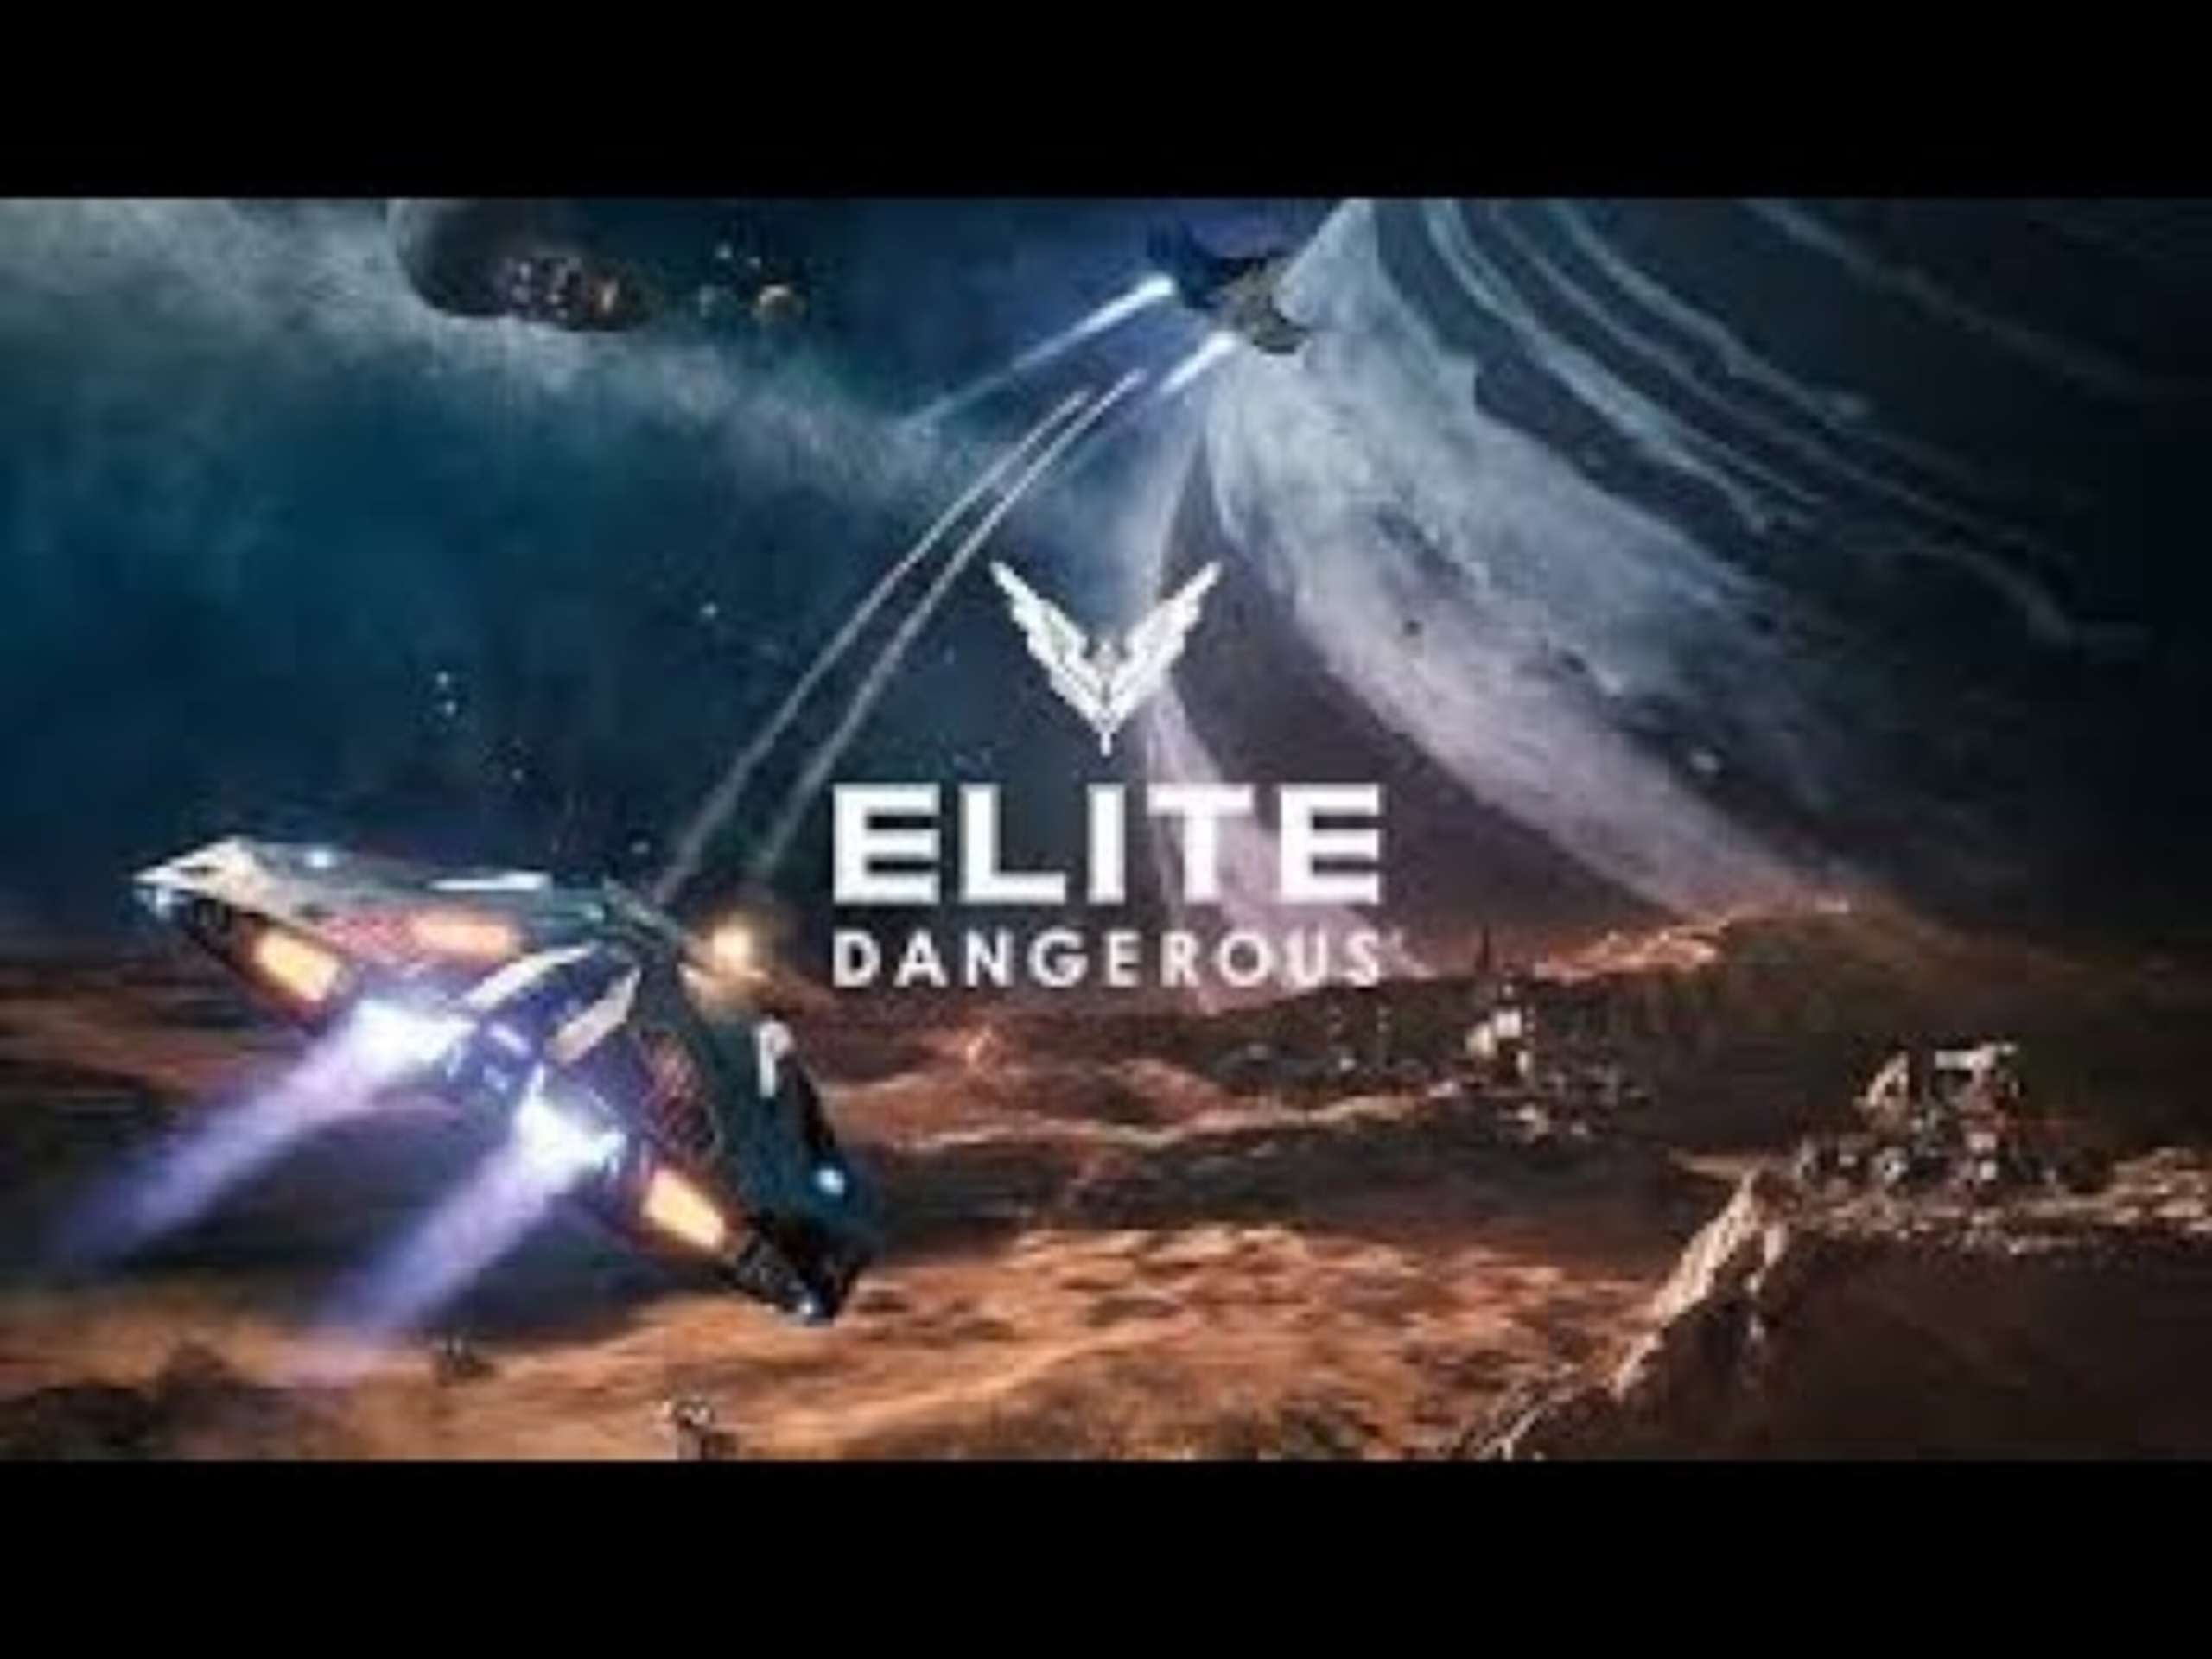 Elite Dangerous Wrapped Concluded A Two-Year Narrative With A Major Catastrophe And A Patch